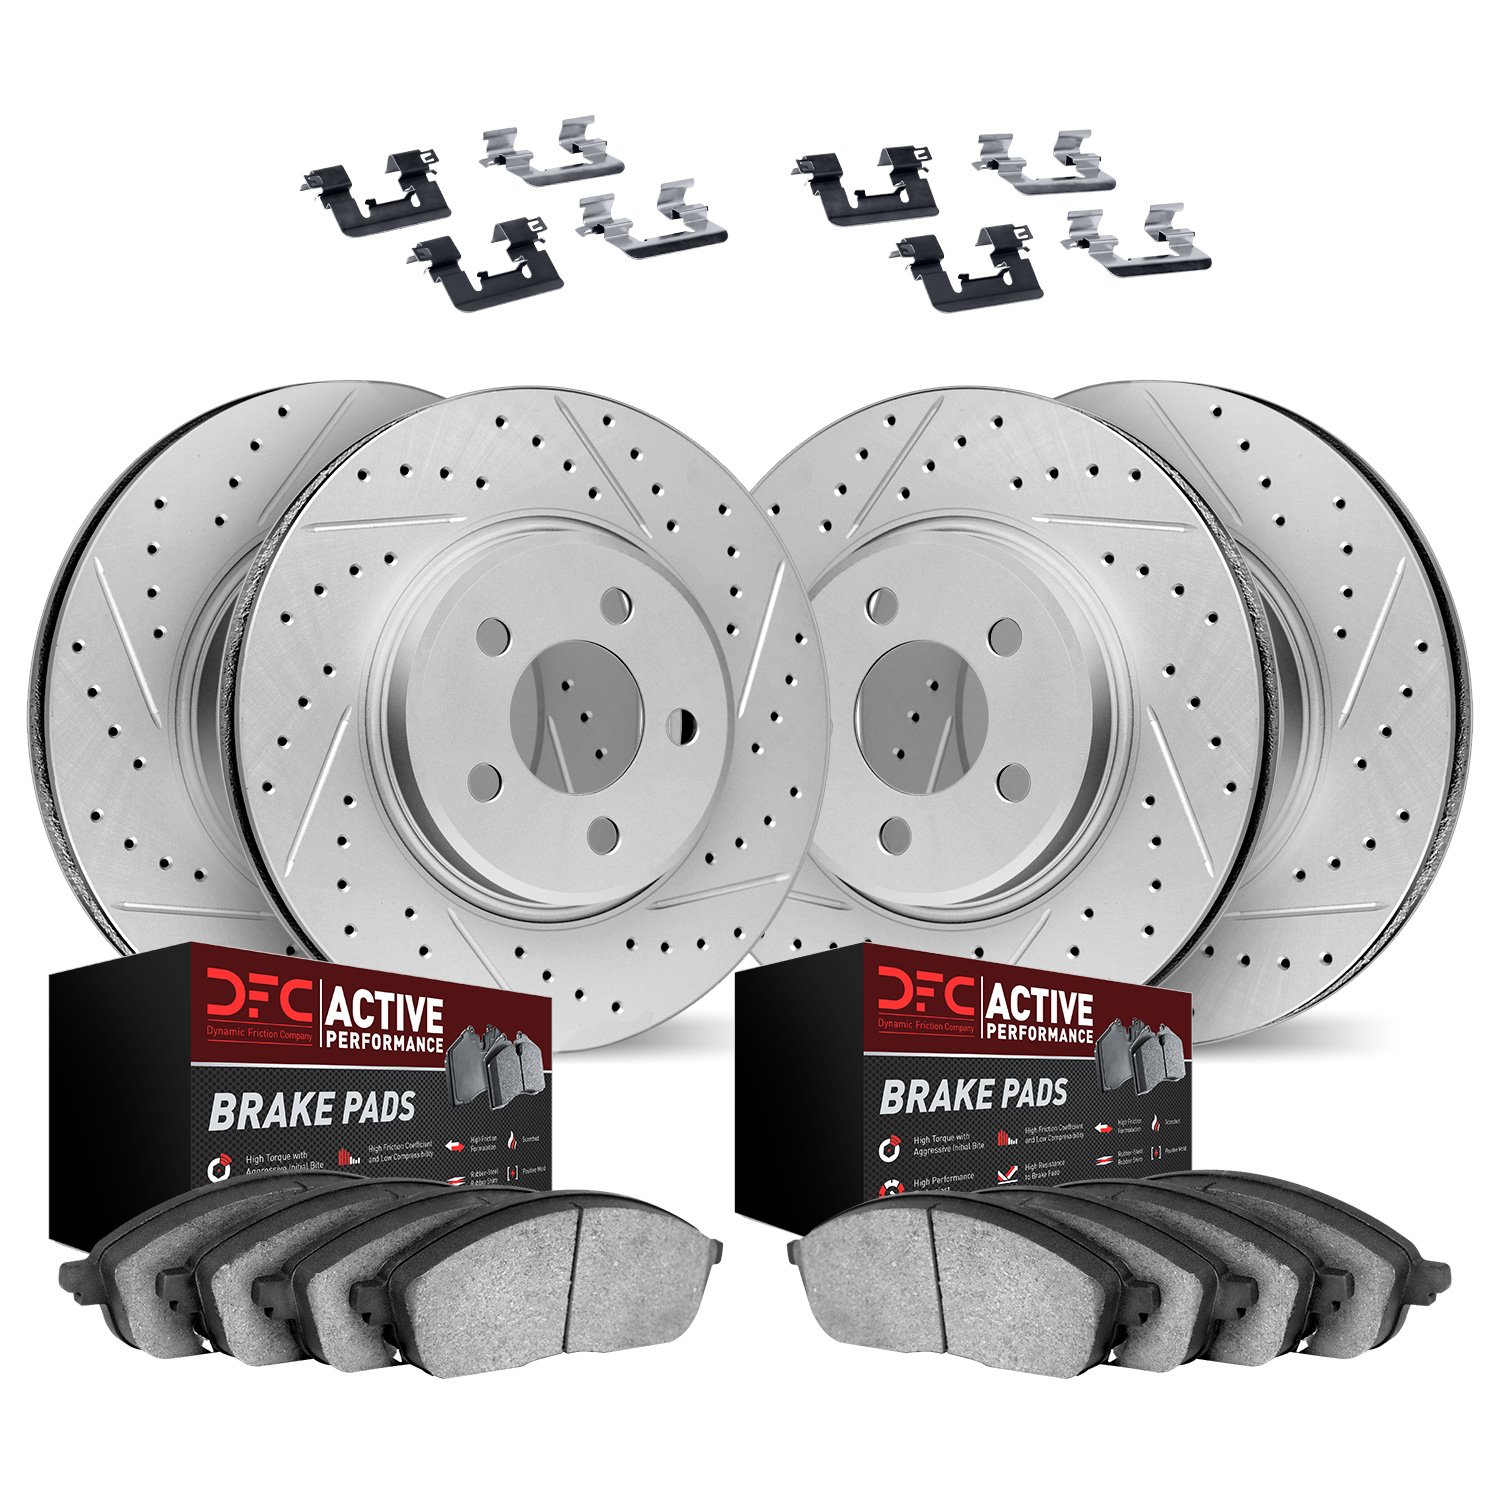 2714-73000 Geoperformance Drilled/Slotted Brake Rotors with Active Performance Pads Kit & Hardware, 2004-2009 Audi/Volkswagen, P